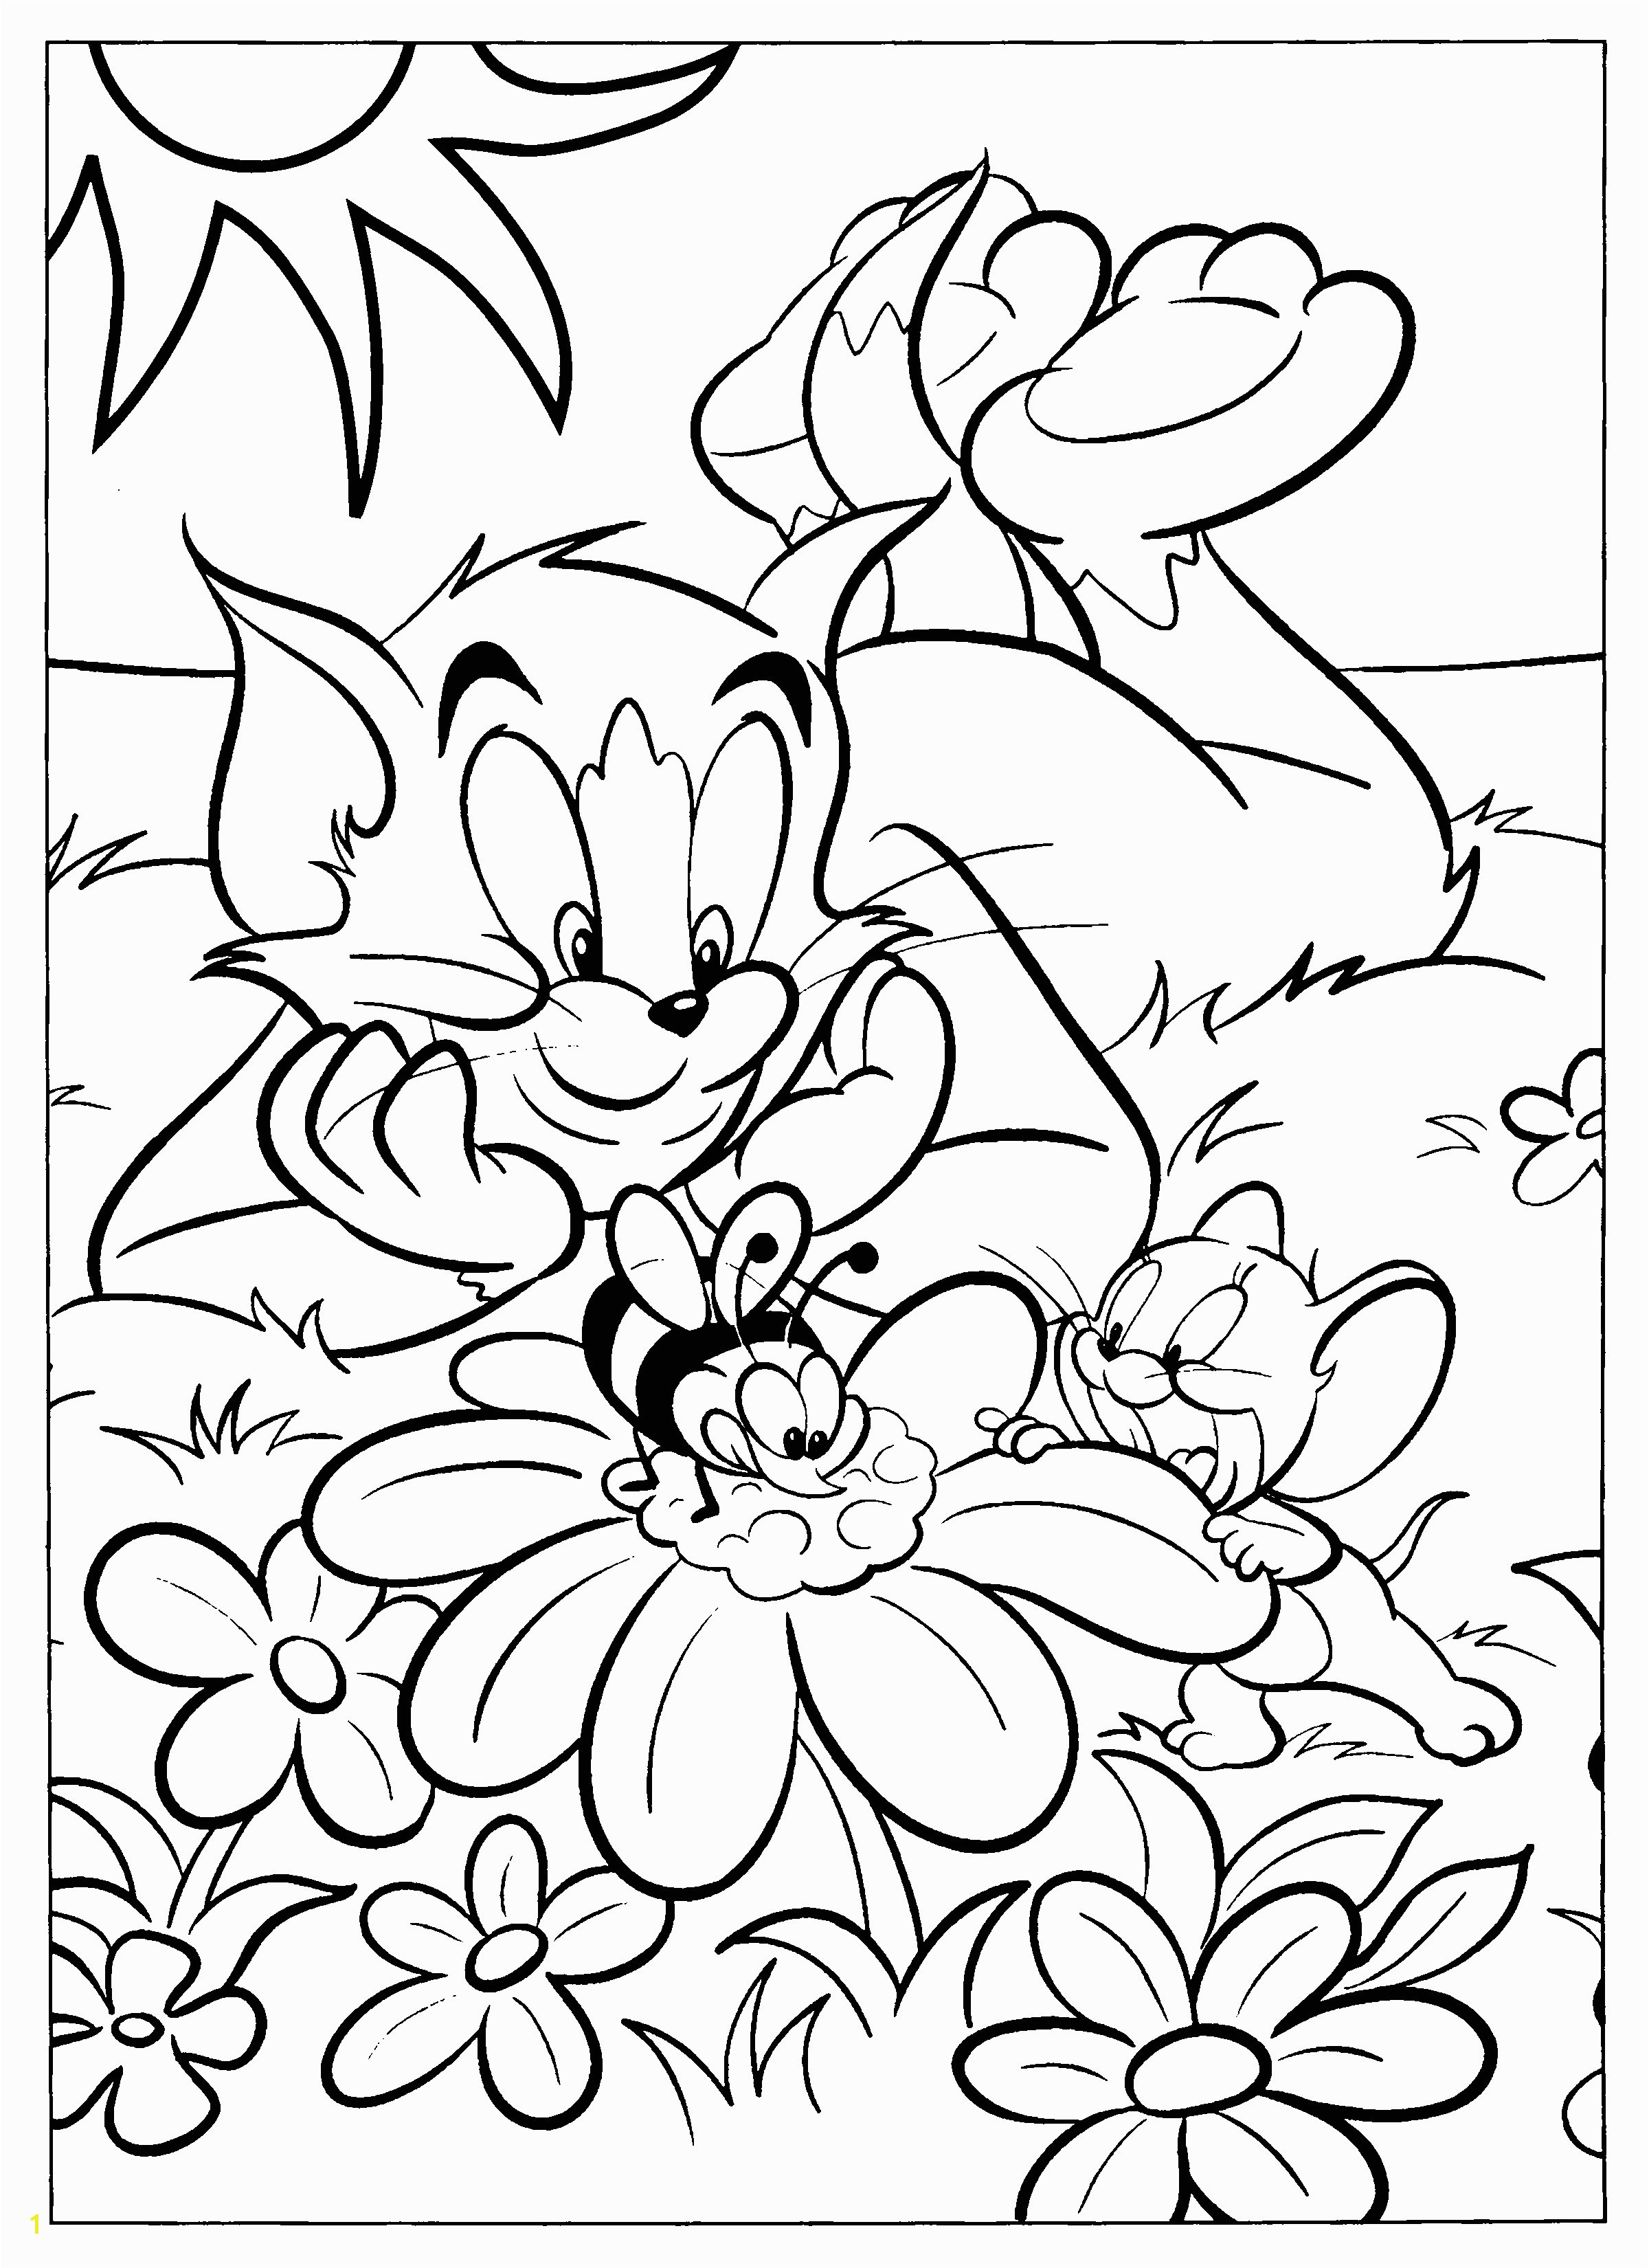 Tom And Jerry Coloring Simple Full Page Coloring Pages